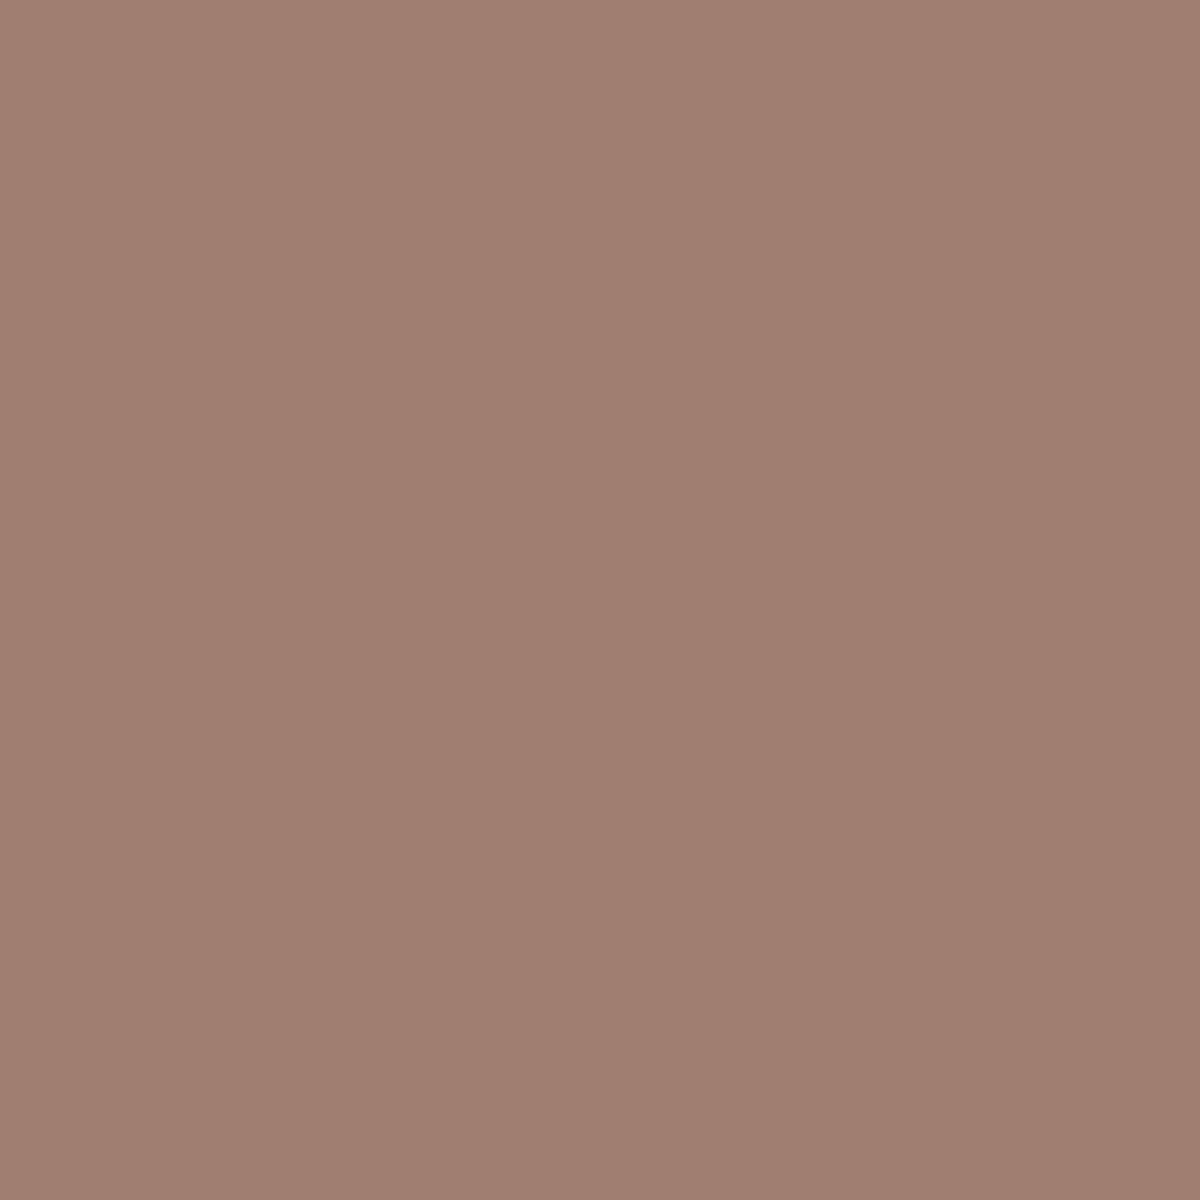 Dusty Ranch Brown 2105-40